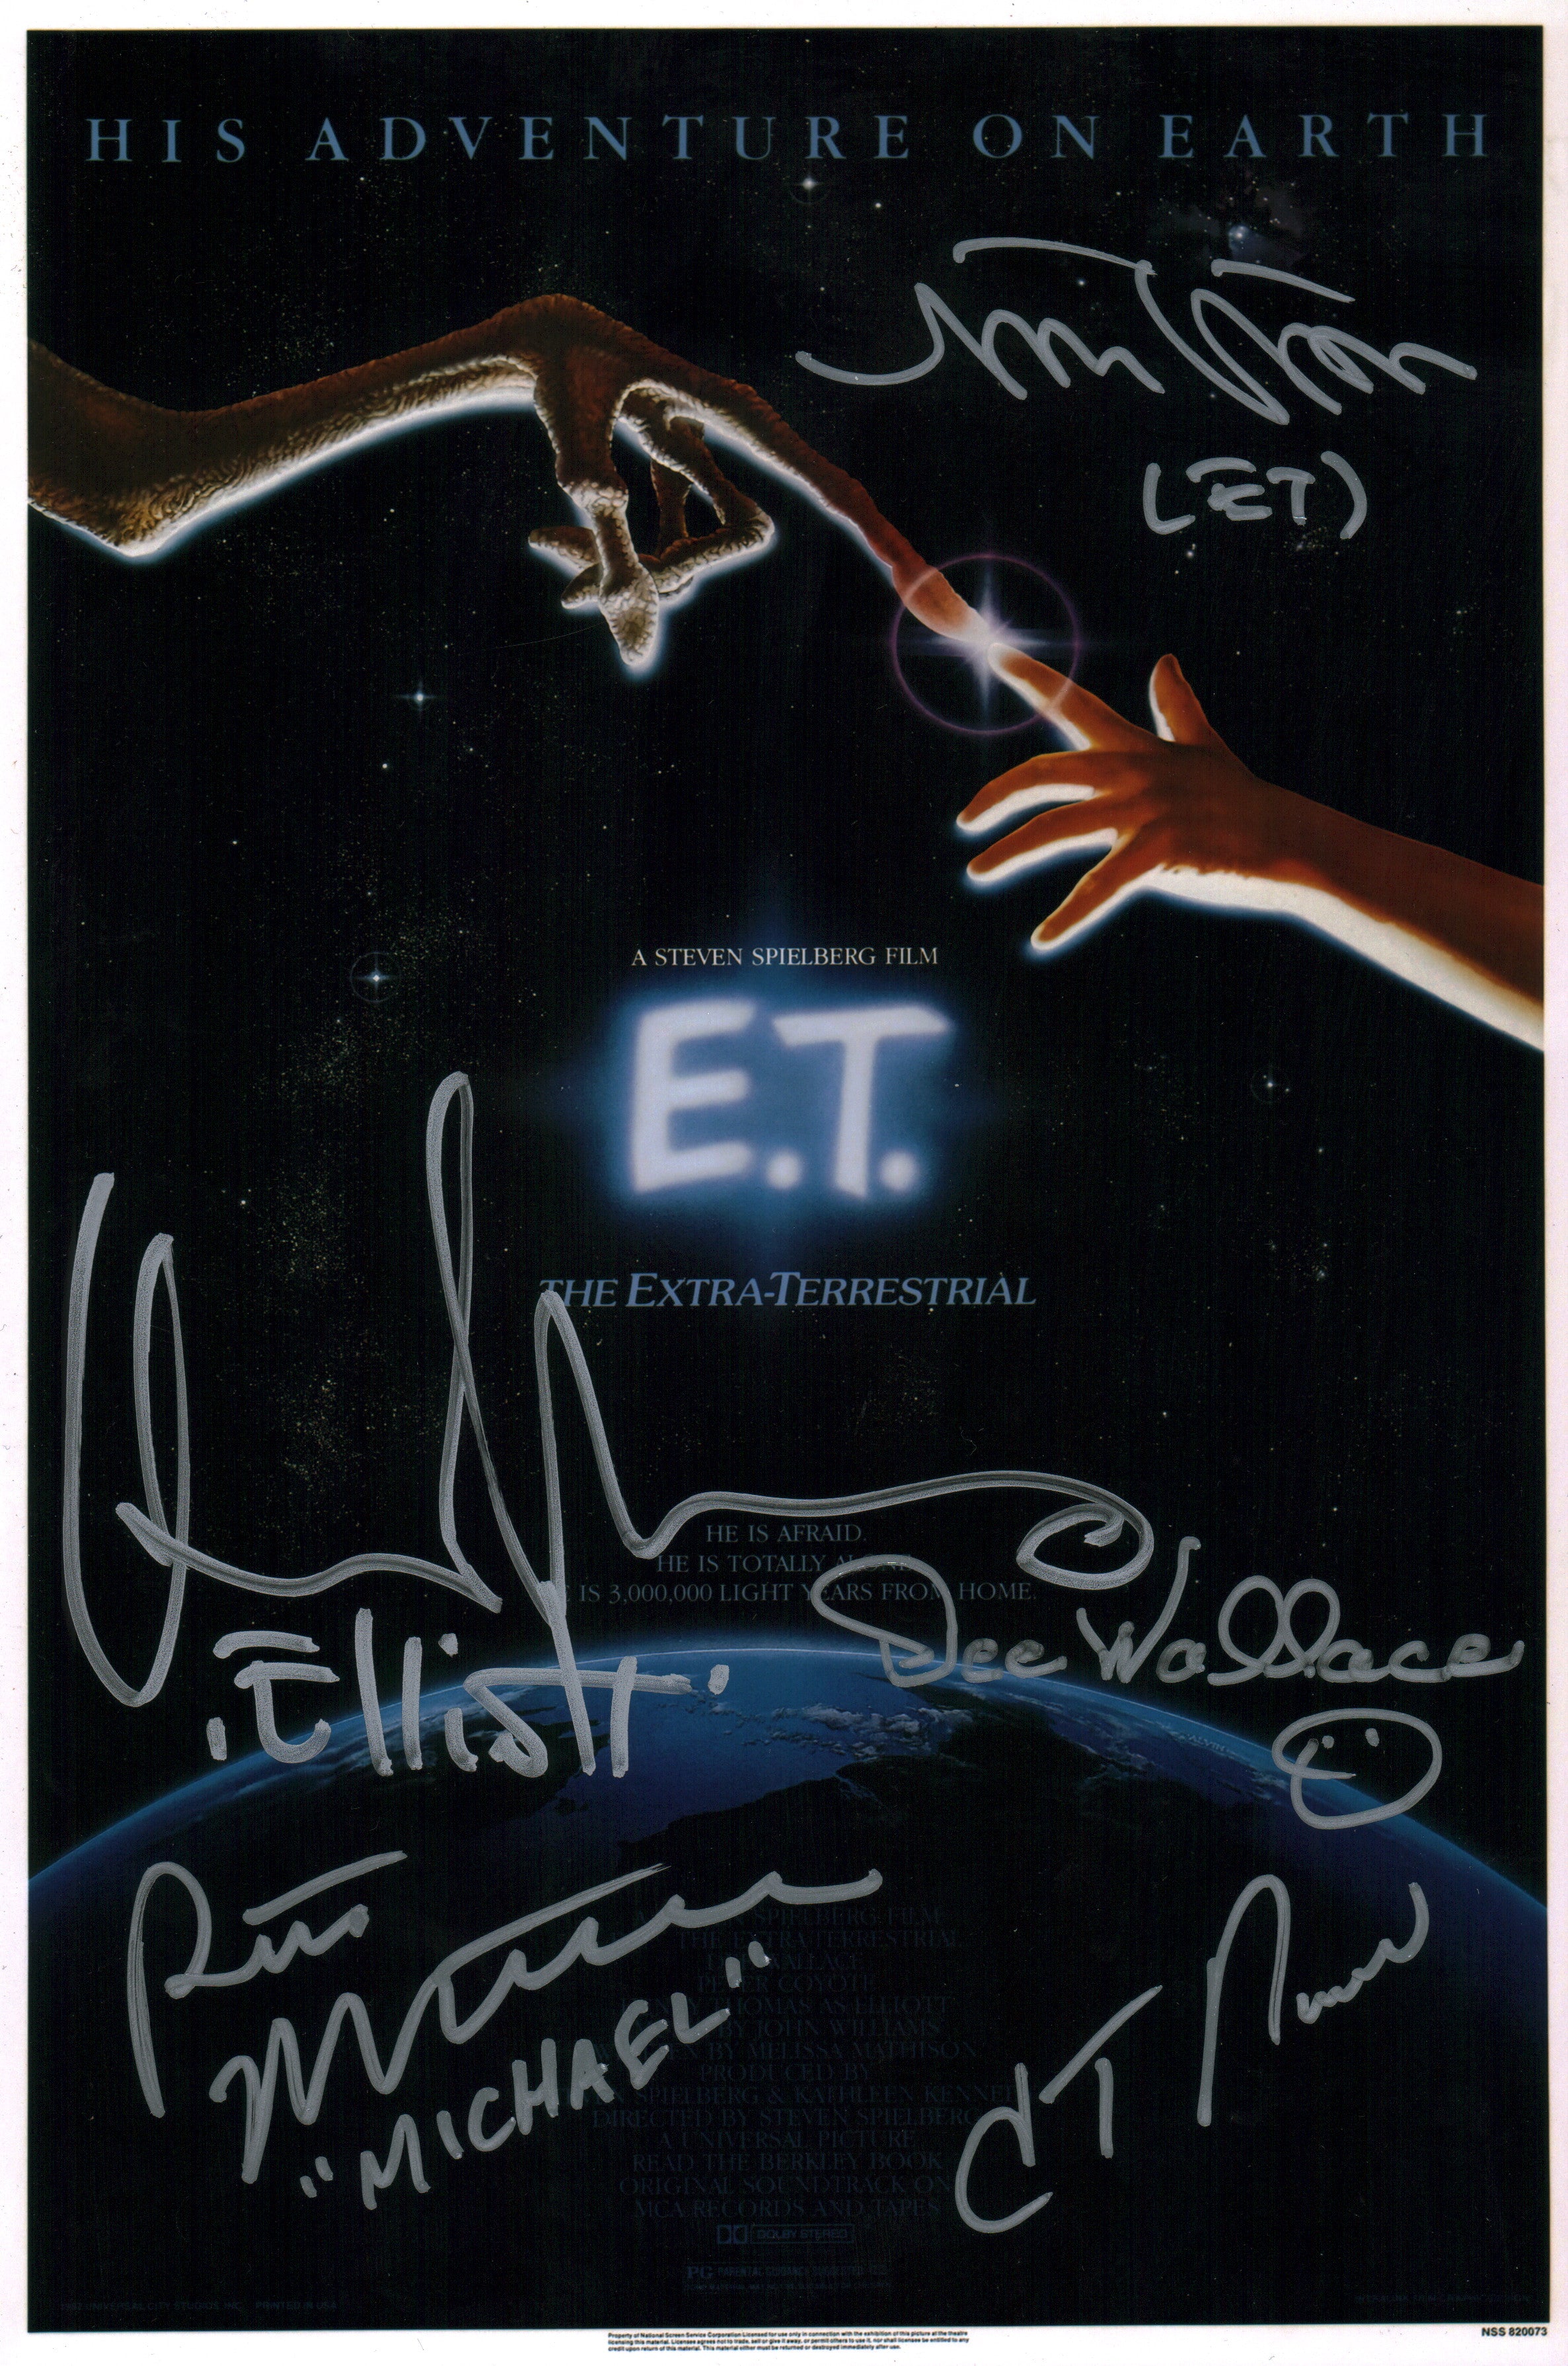 ET The Extra Terrestrial 8x12 Cast x5 DeMeritt Thomas Wallace MacNaughton Howell Signed Photo Poster JSA Certified Autograph